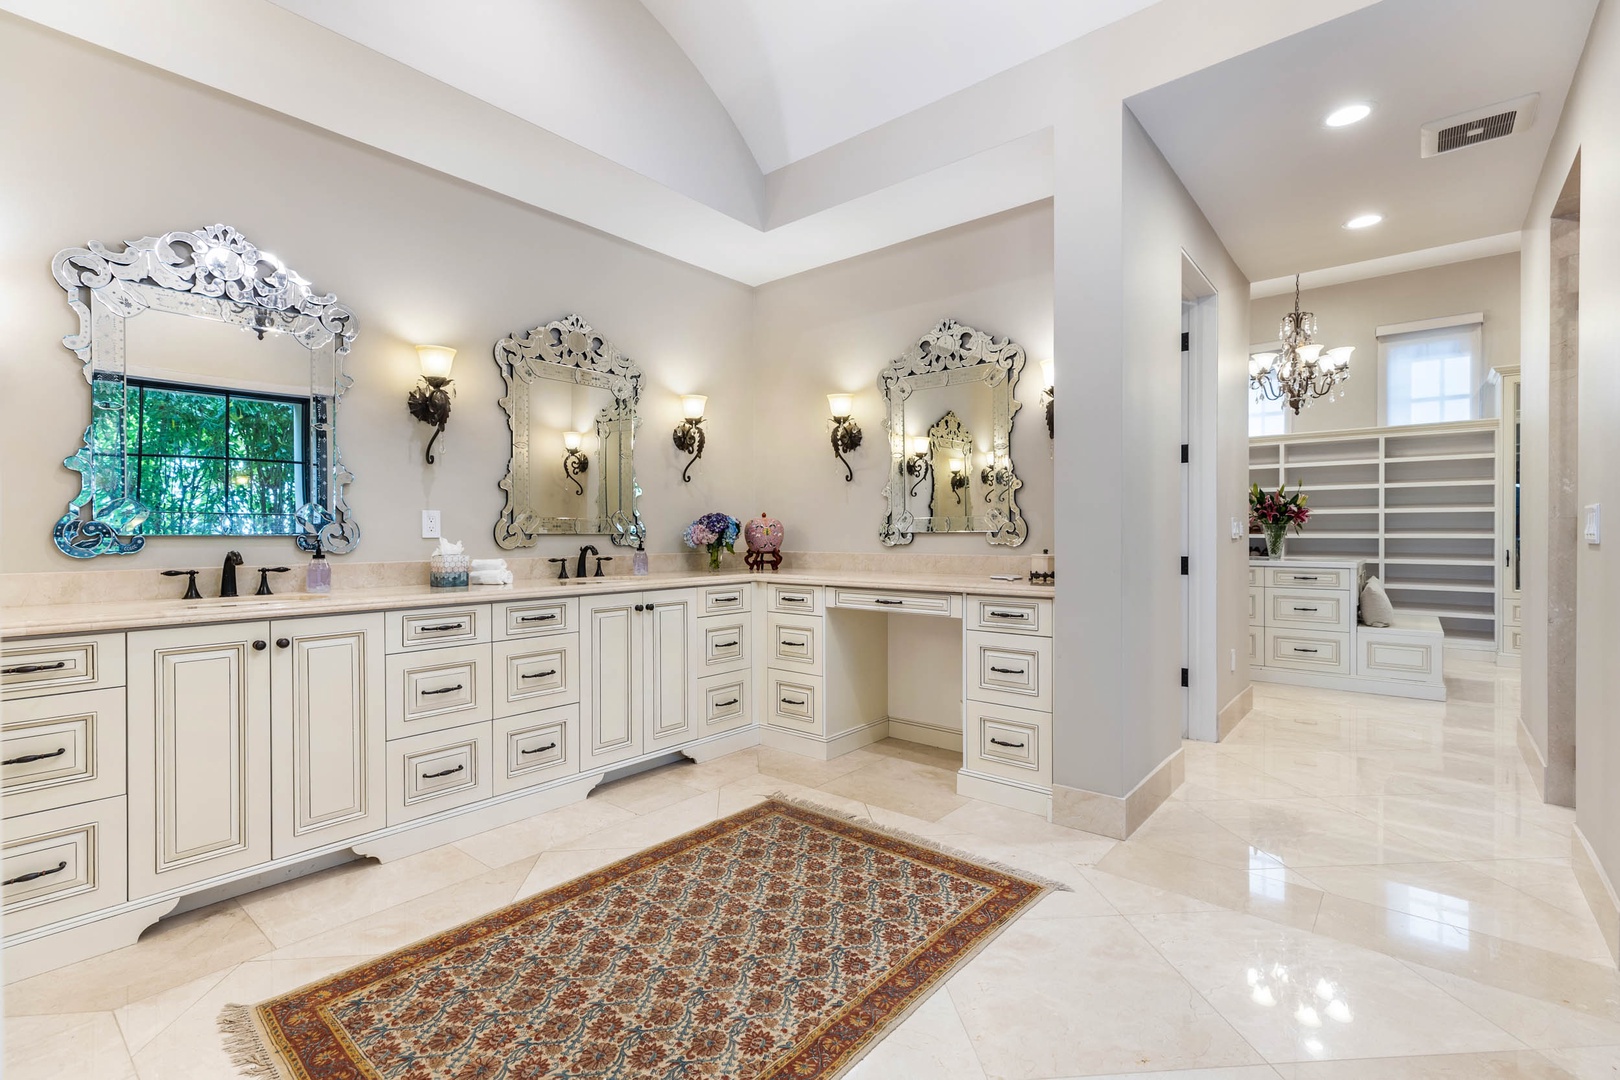 Honolulu Vacation Rentals, The Kahala Mansion - The ensuite is pure luxury, with bright and spacious space.